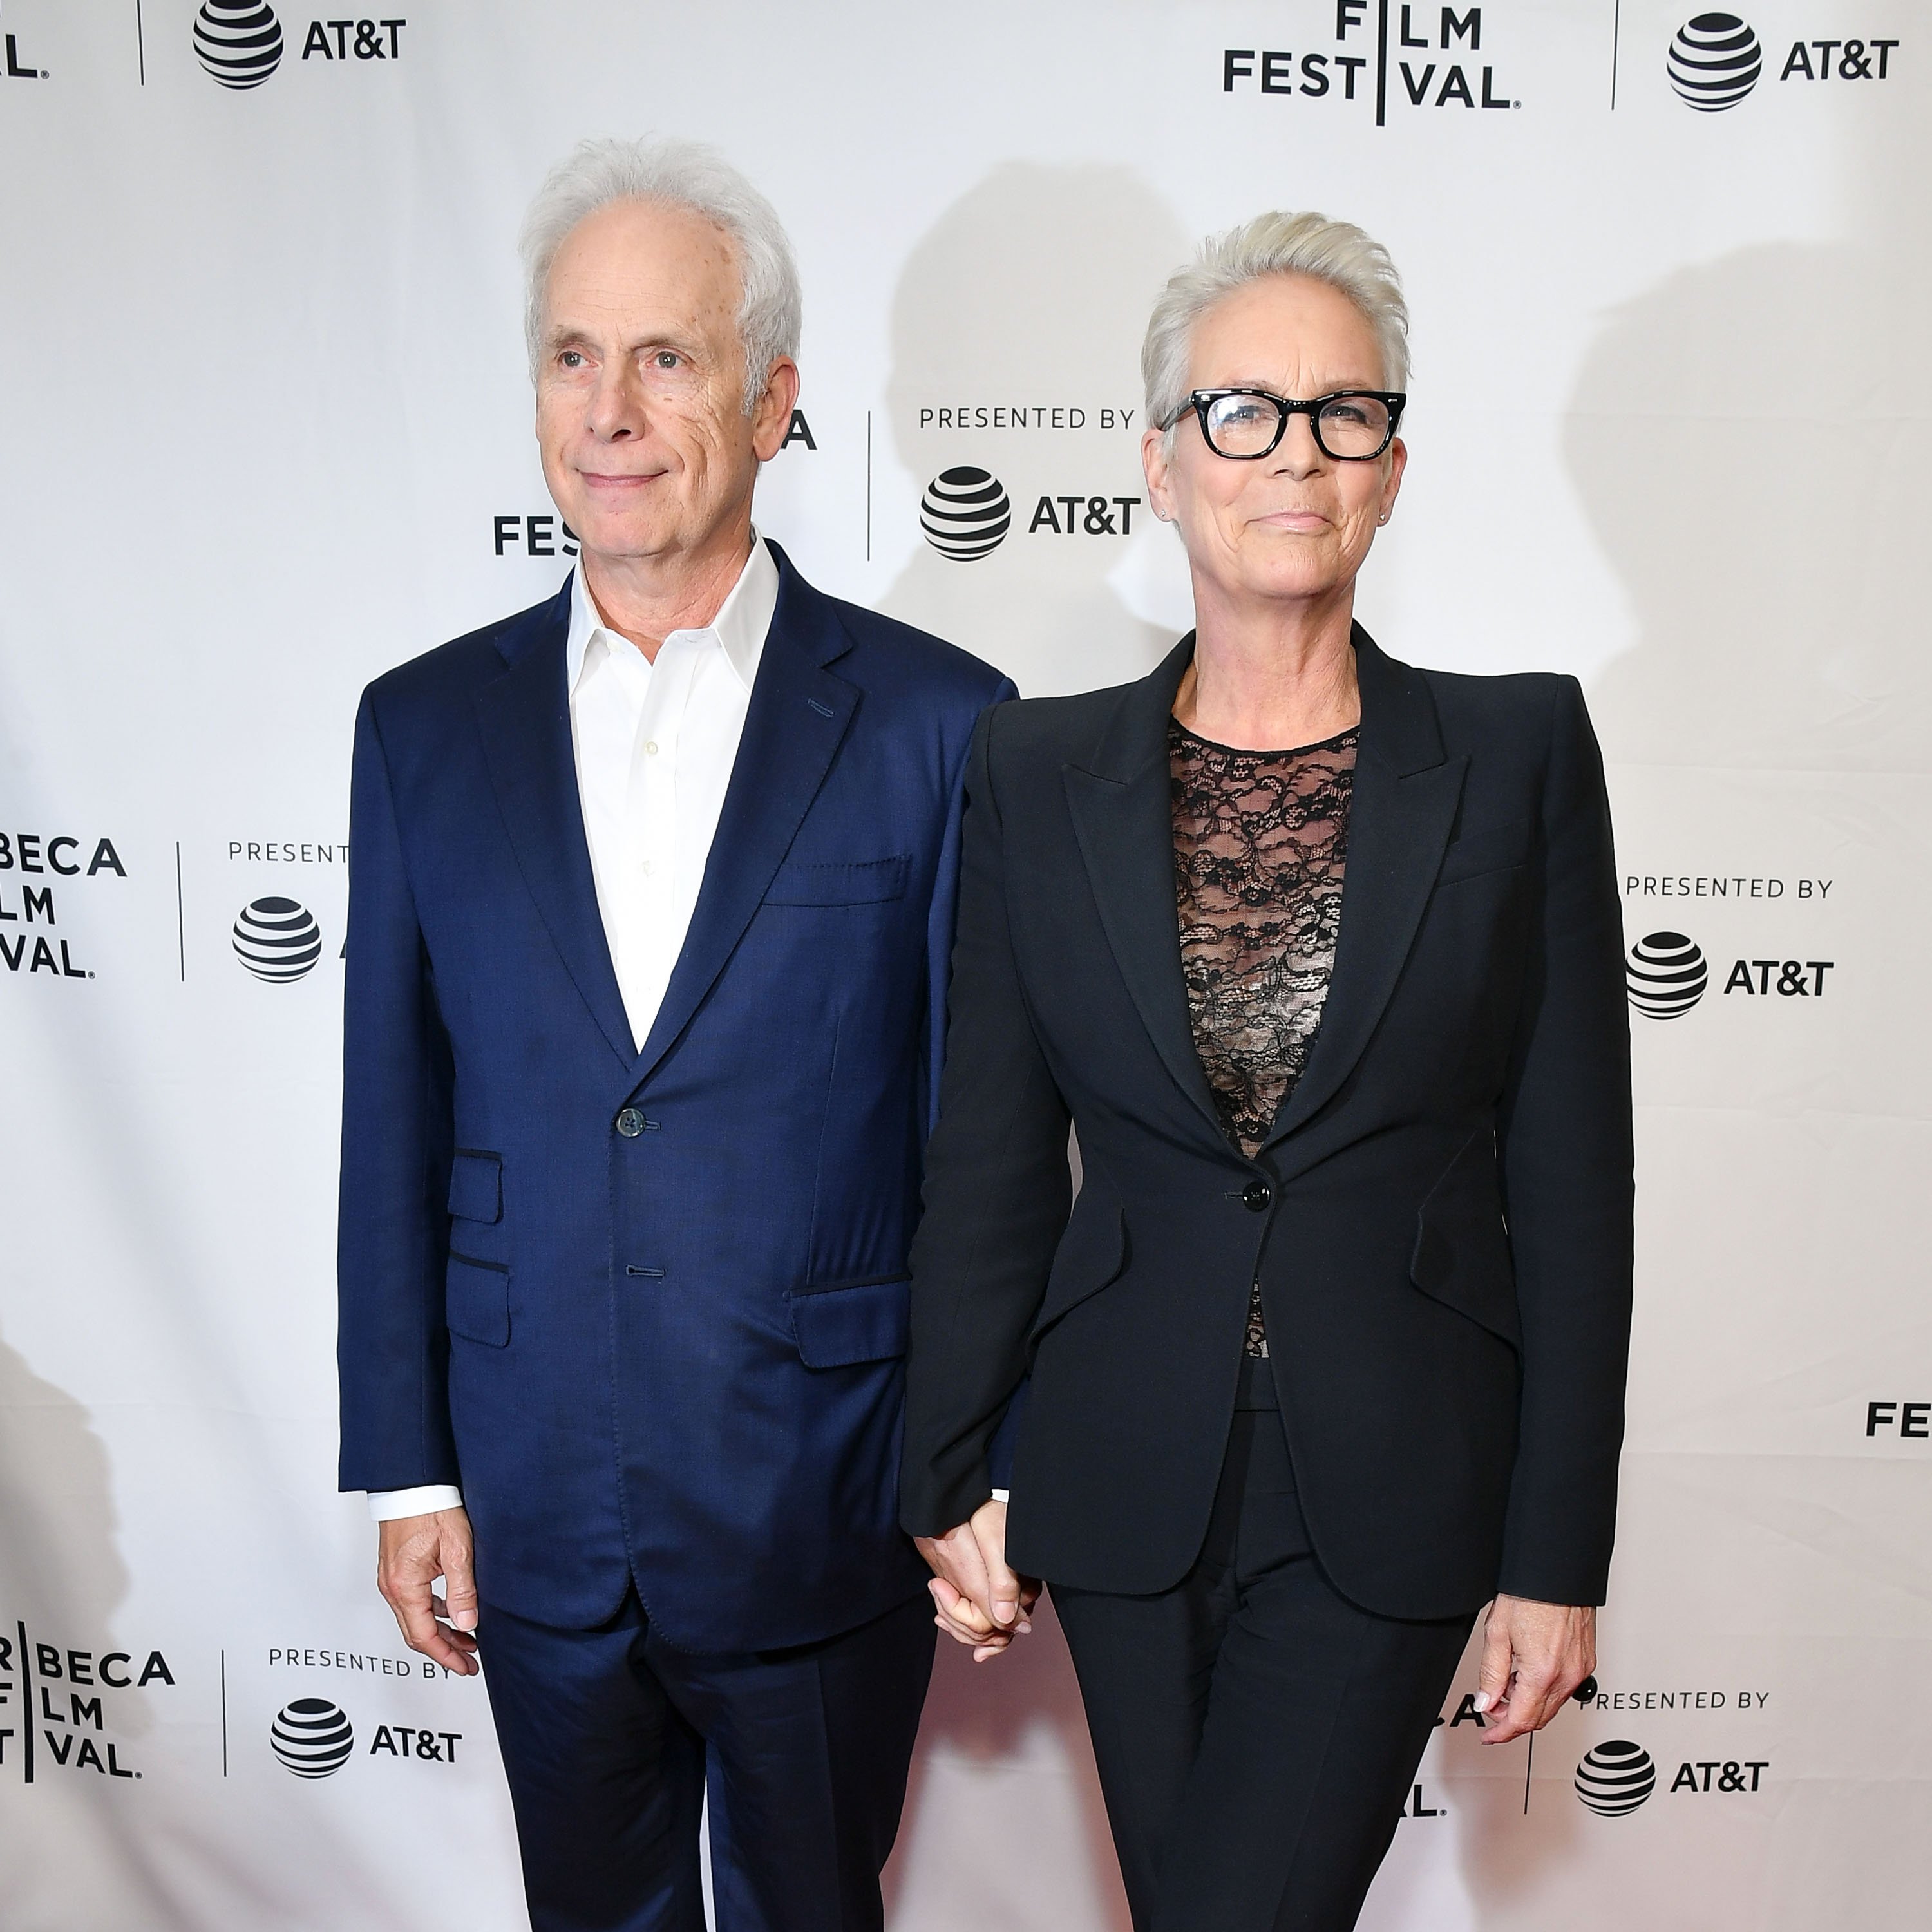 Christopher Guest and Jamie Lee Curtis attend the "This Is Spinal Tap" 35th Anniversary during the 2019 Tribeca Film Festival at the Beacon Theatre on April 27, 2019, in New York City. | Source: Getty Images